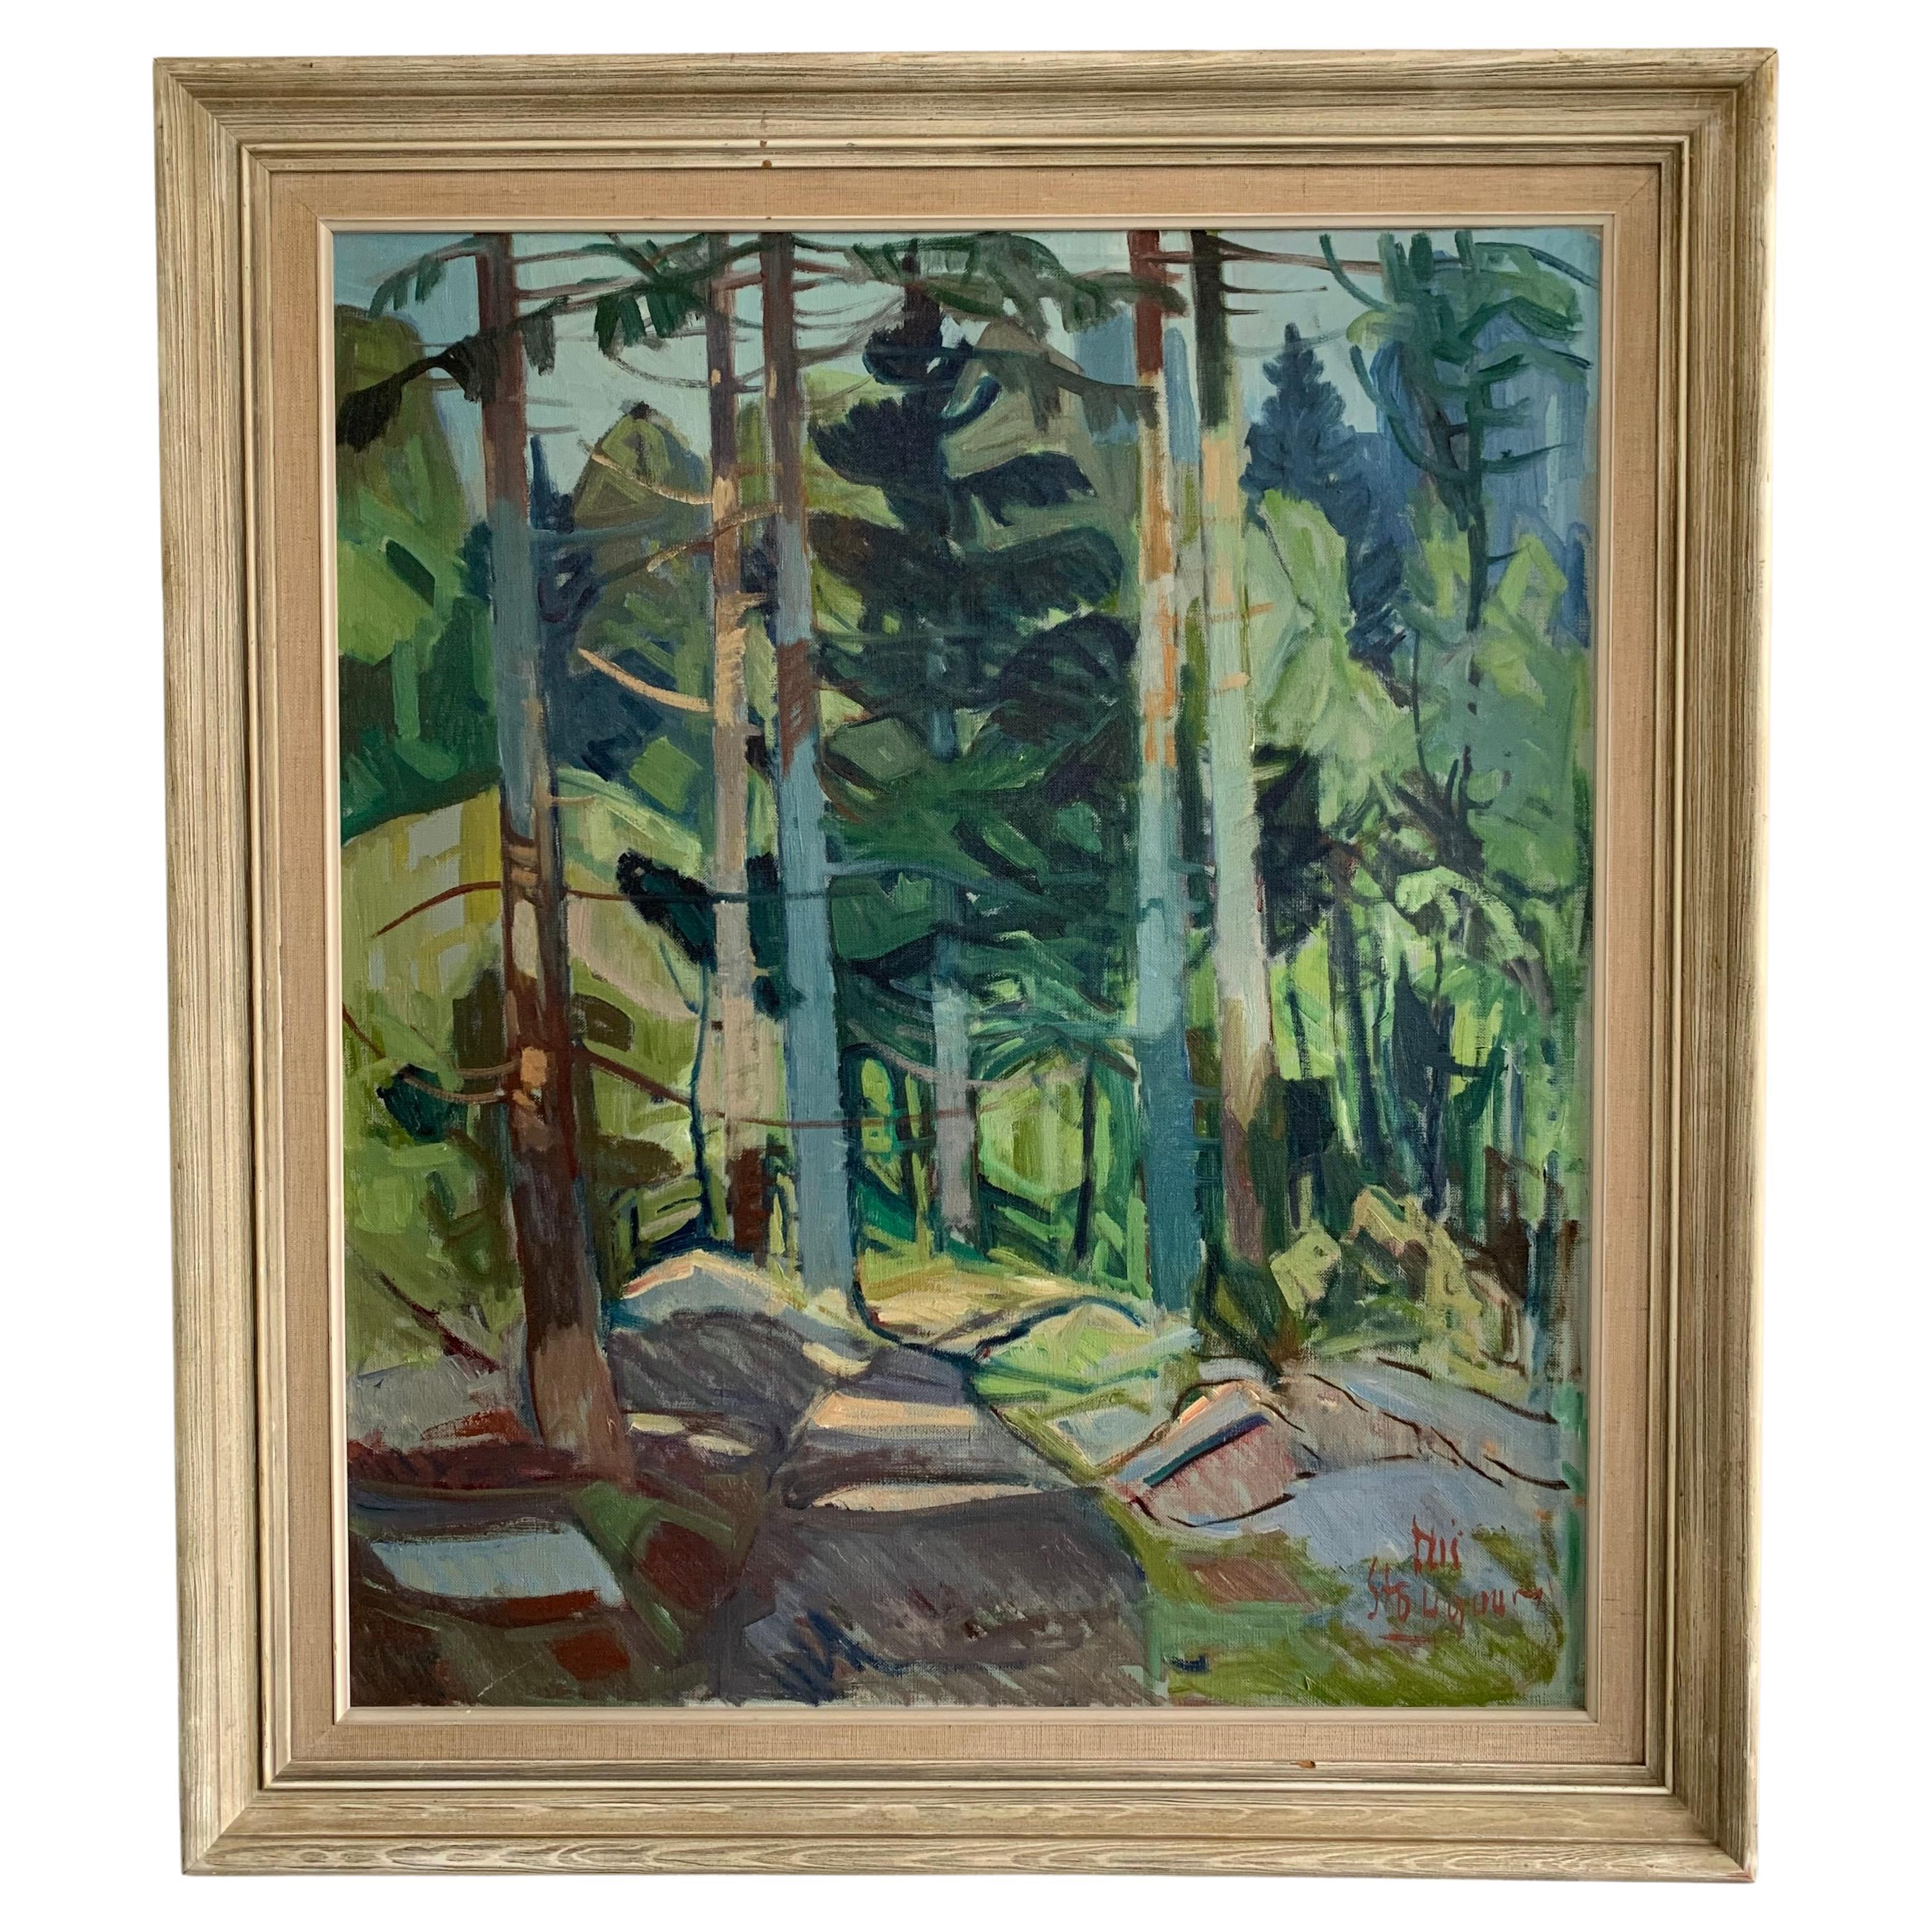 Forest scene painting by Danish painter and ceramist Nis Stougaard (1906-1987) in beautiful colors.

Signed lower left 'Nis Stougaard'. 

Frame included and measures accordingly. Painting would benefit much from new framing.   

